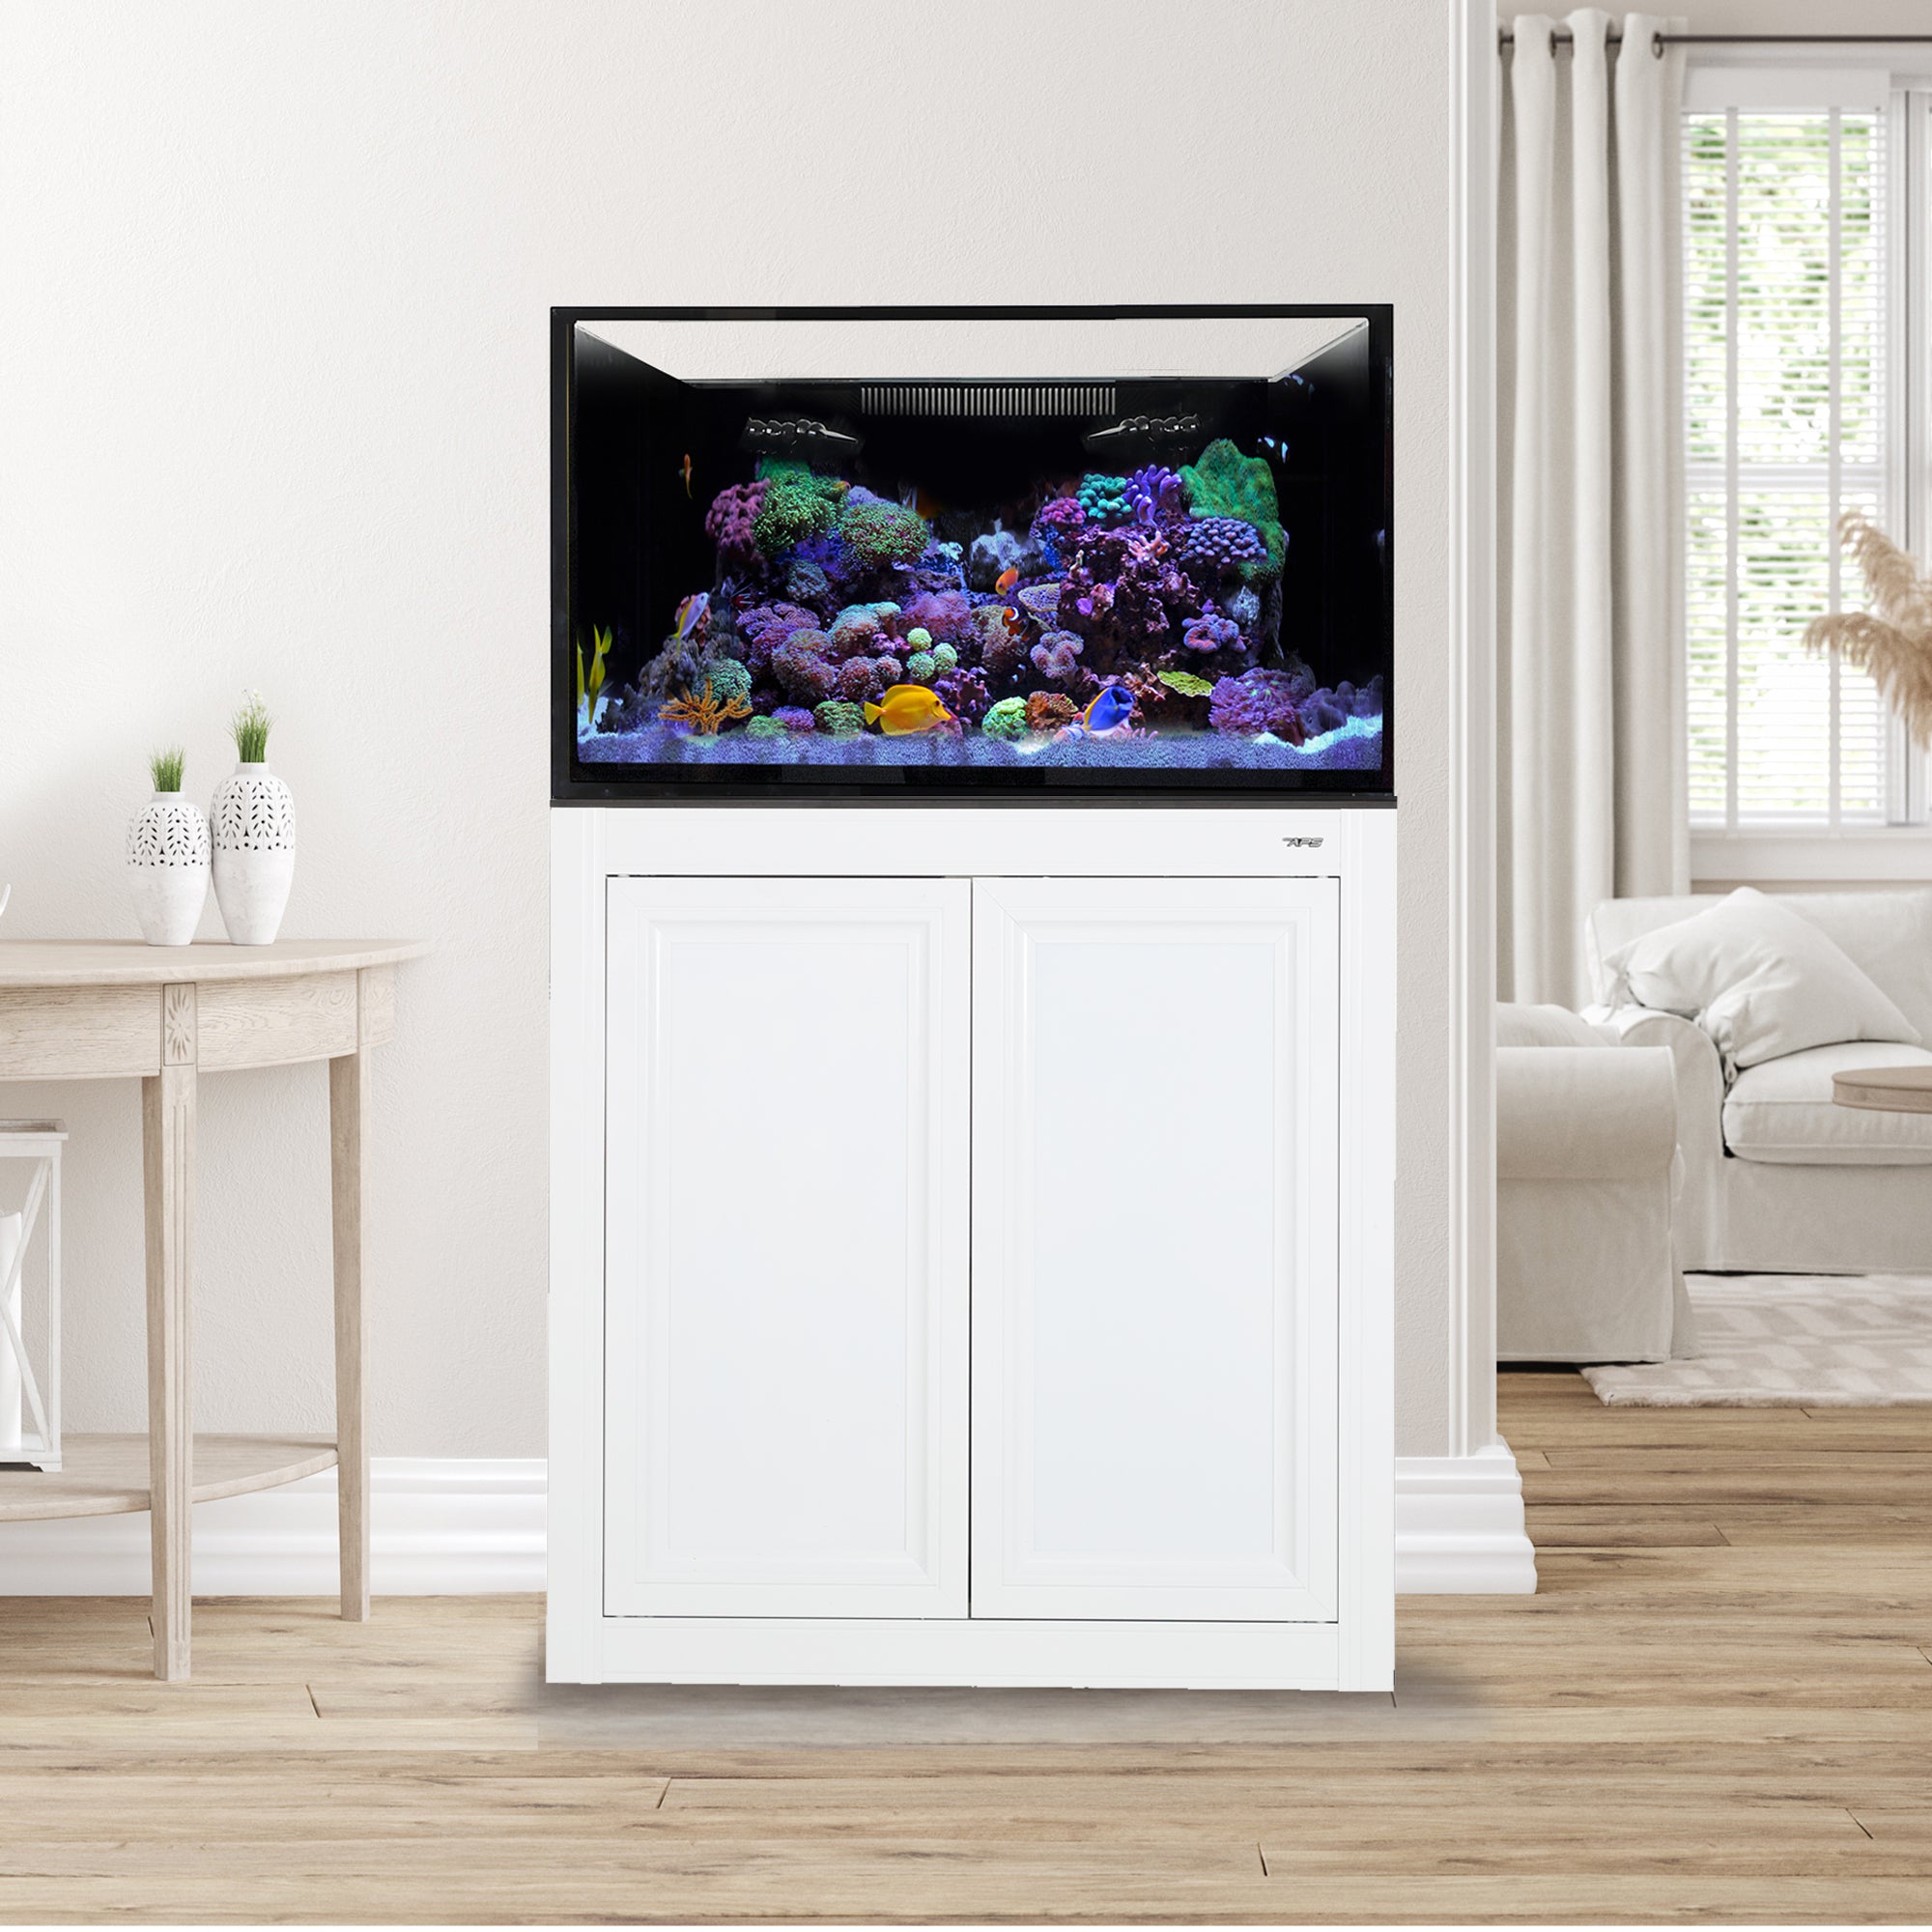 Innovative Marine EXT 75 Gallon Complete Reef System - White